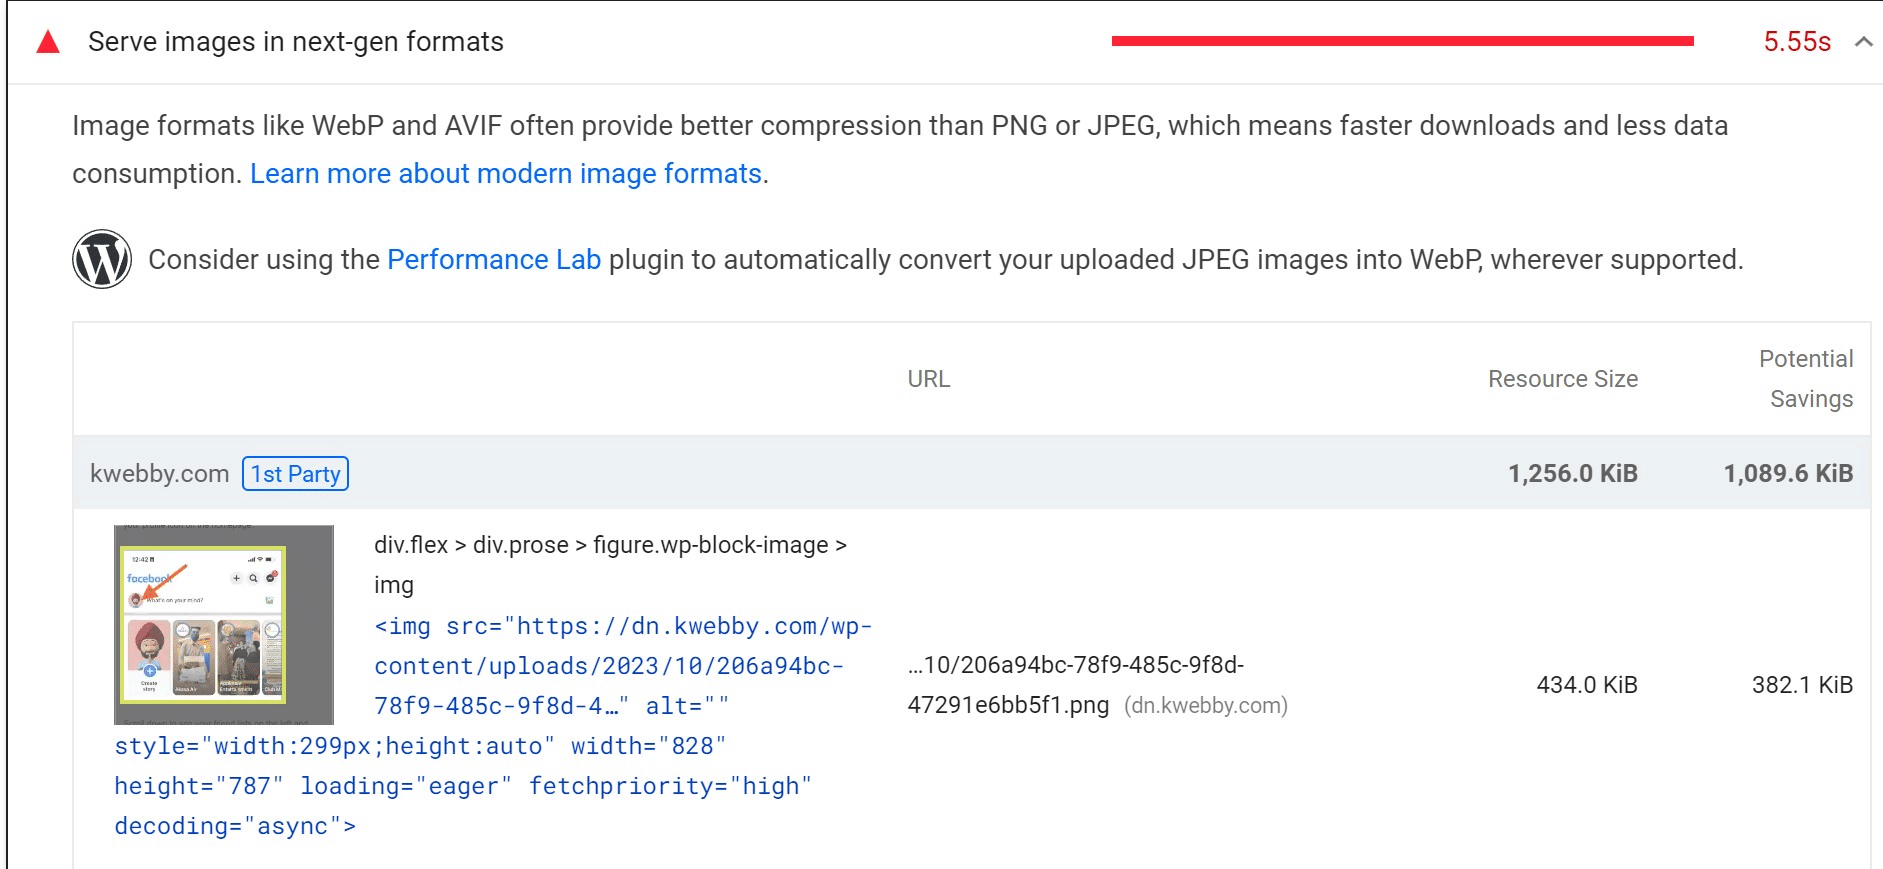 How to Serve Images in Next-Gen Formats (4 Fixes) 1